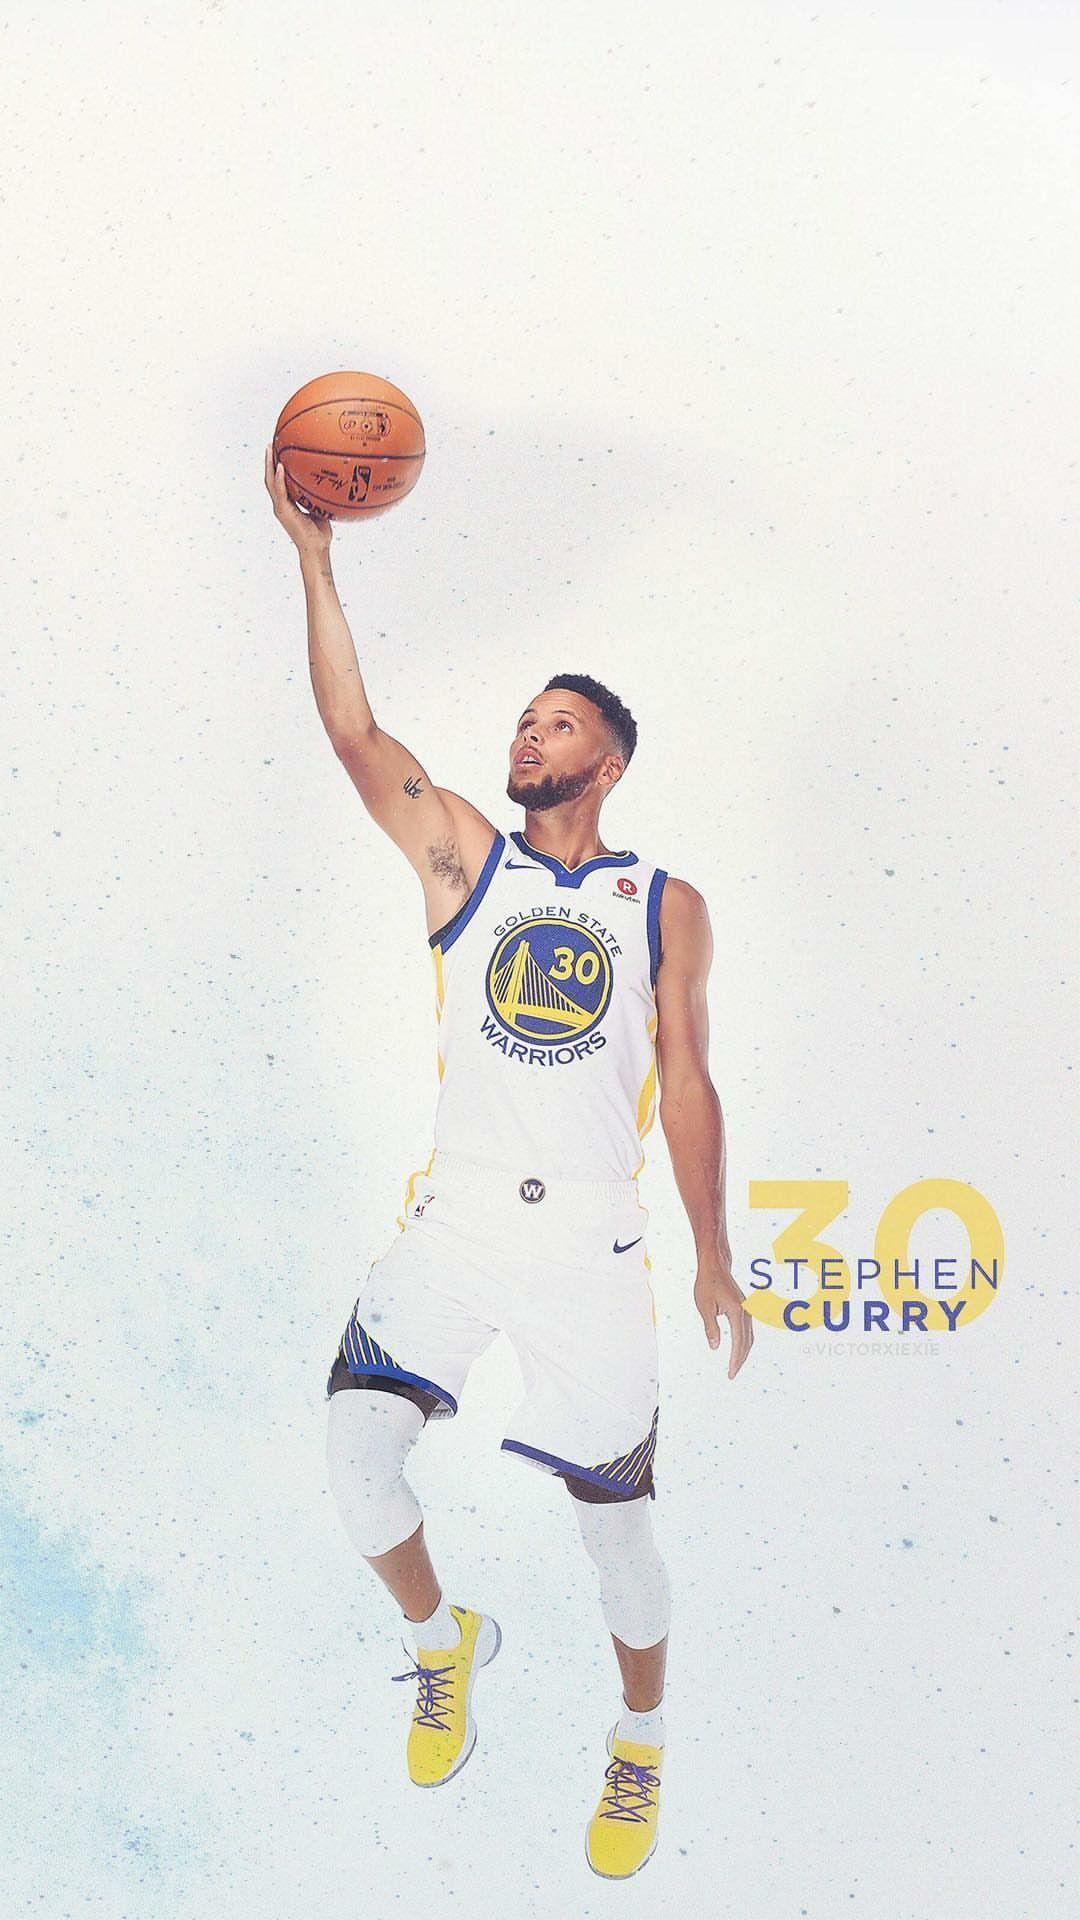 Stephen Curry wallpaper. Sports. Stephen curry